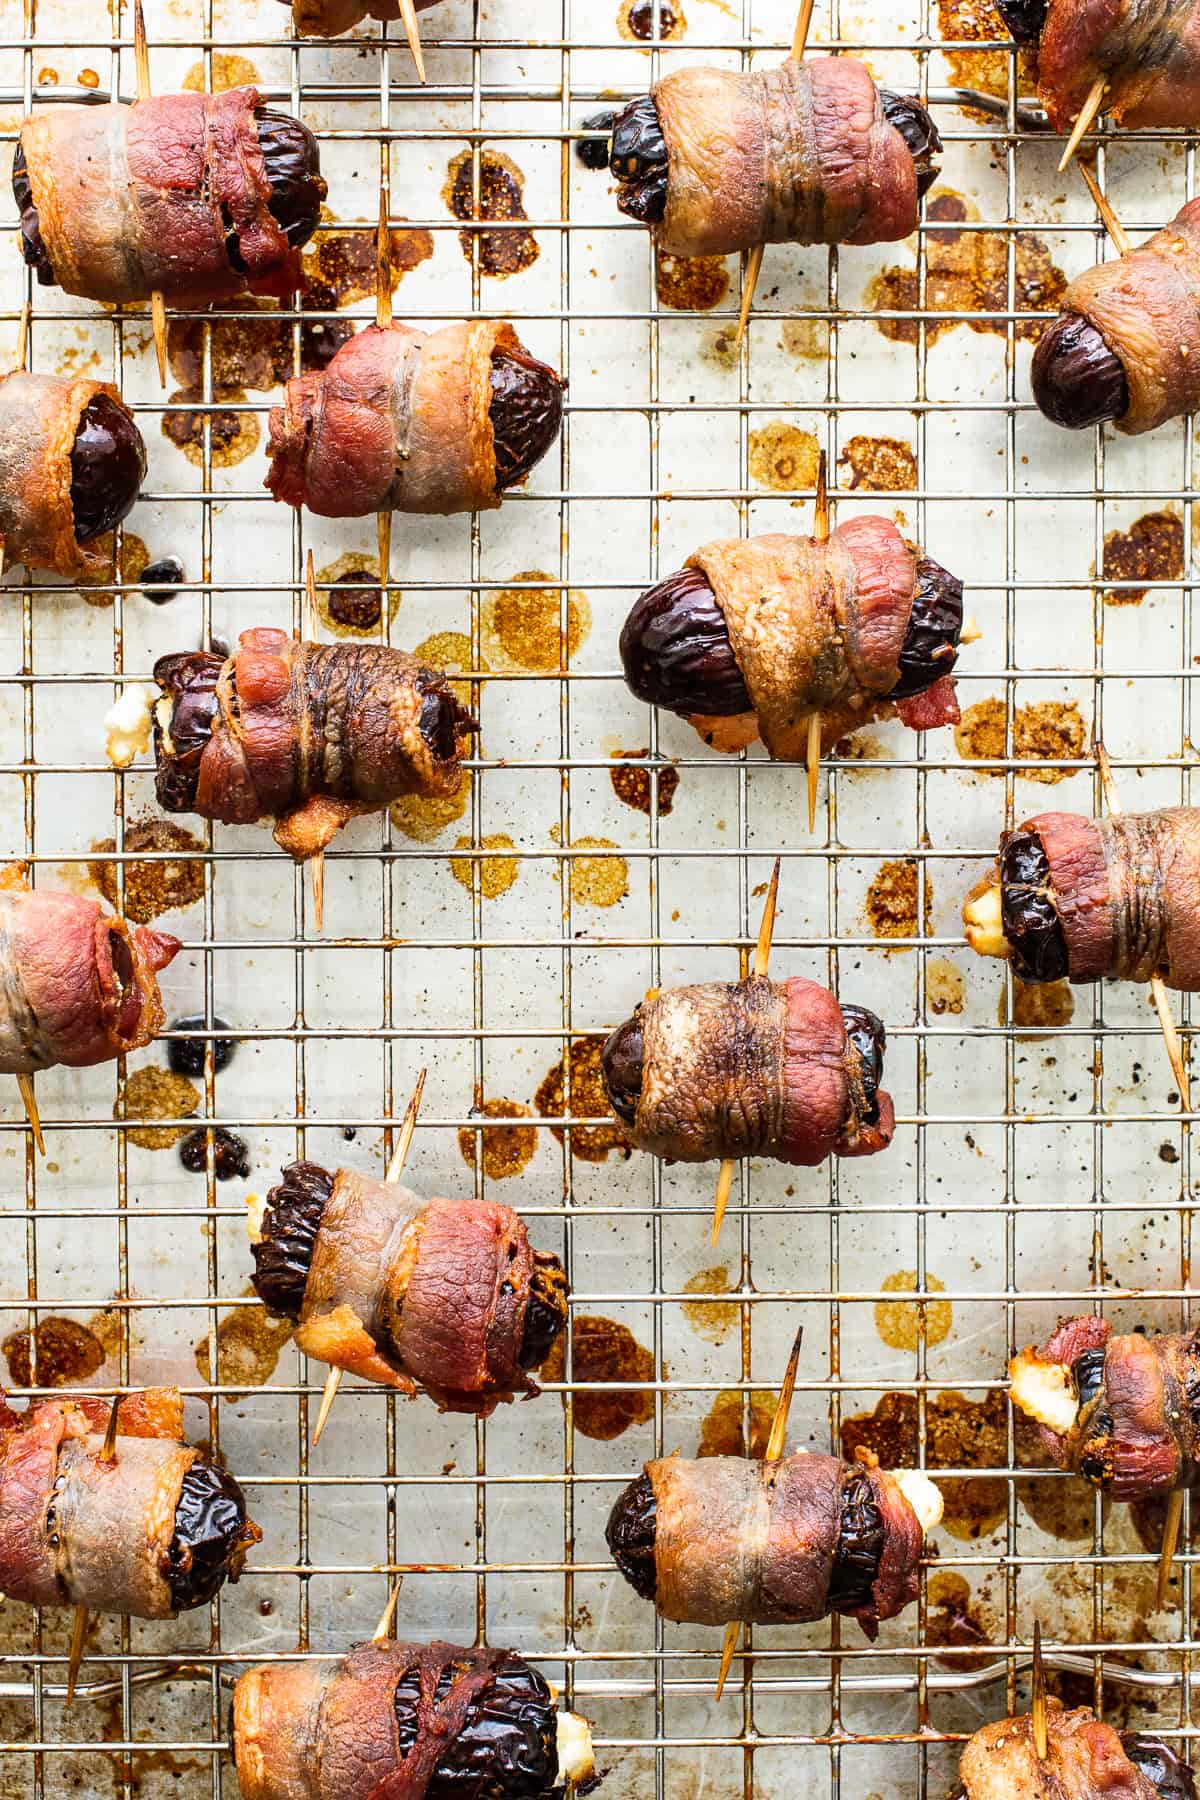 Bacon wrapped dates with goat cheese on a baking sheet.